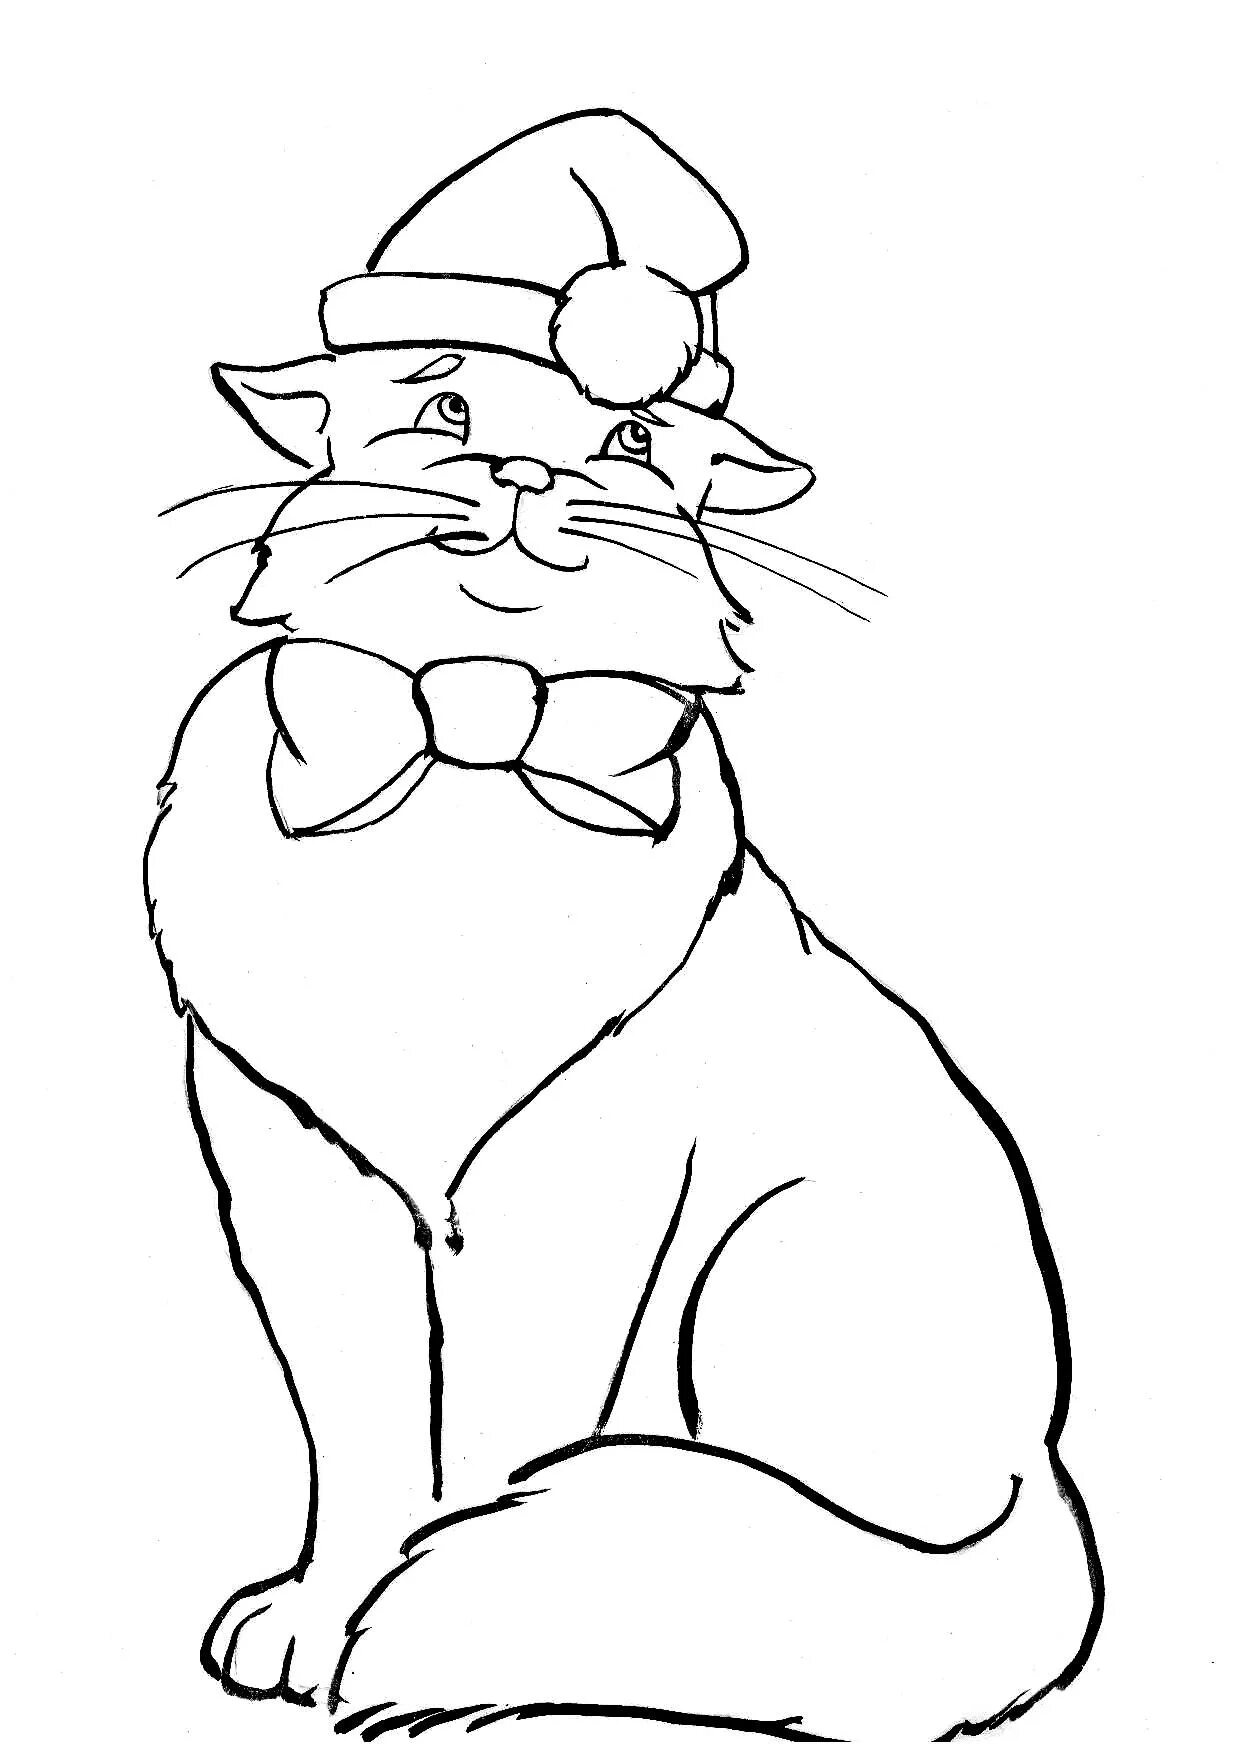 Bubble cat in a hat coloring book